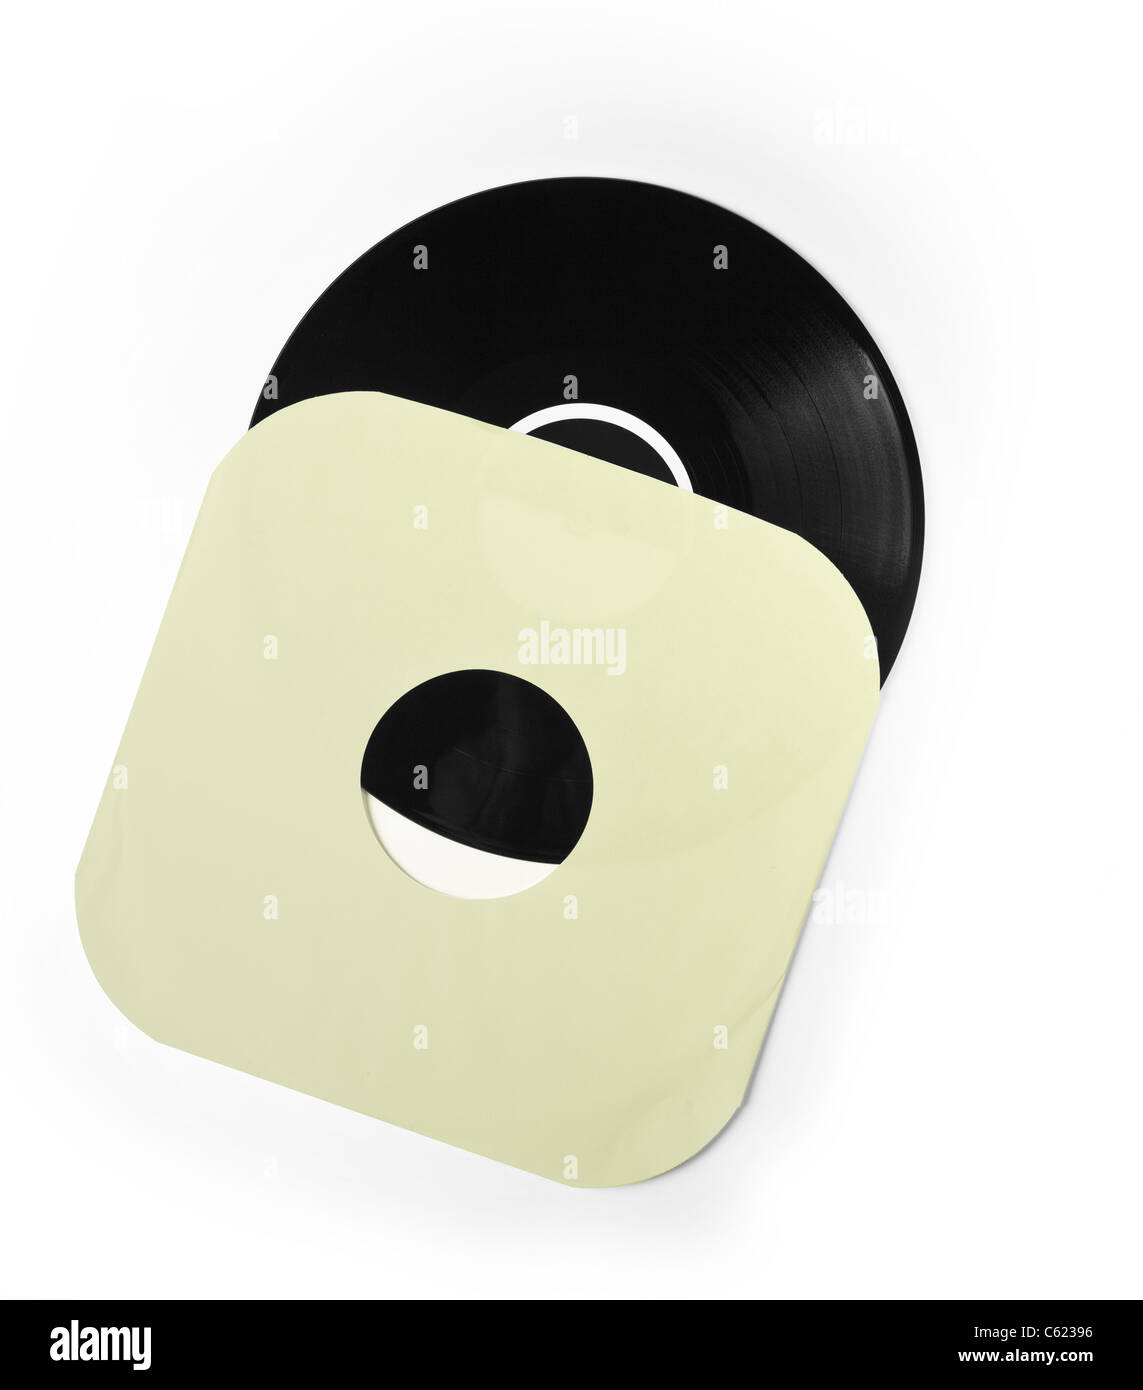 A vinyl record in a blank paper sleeve. Stock Photo